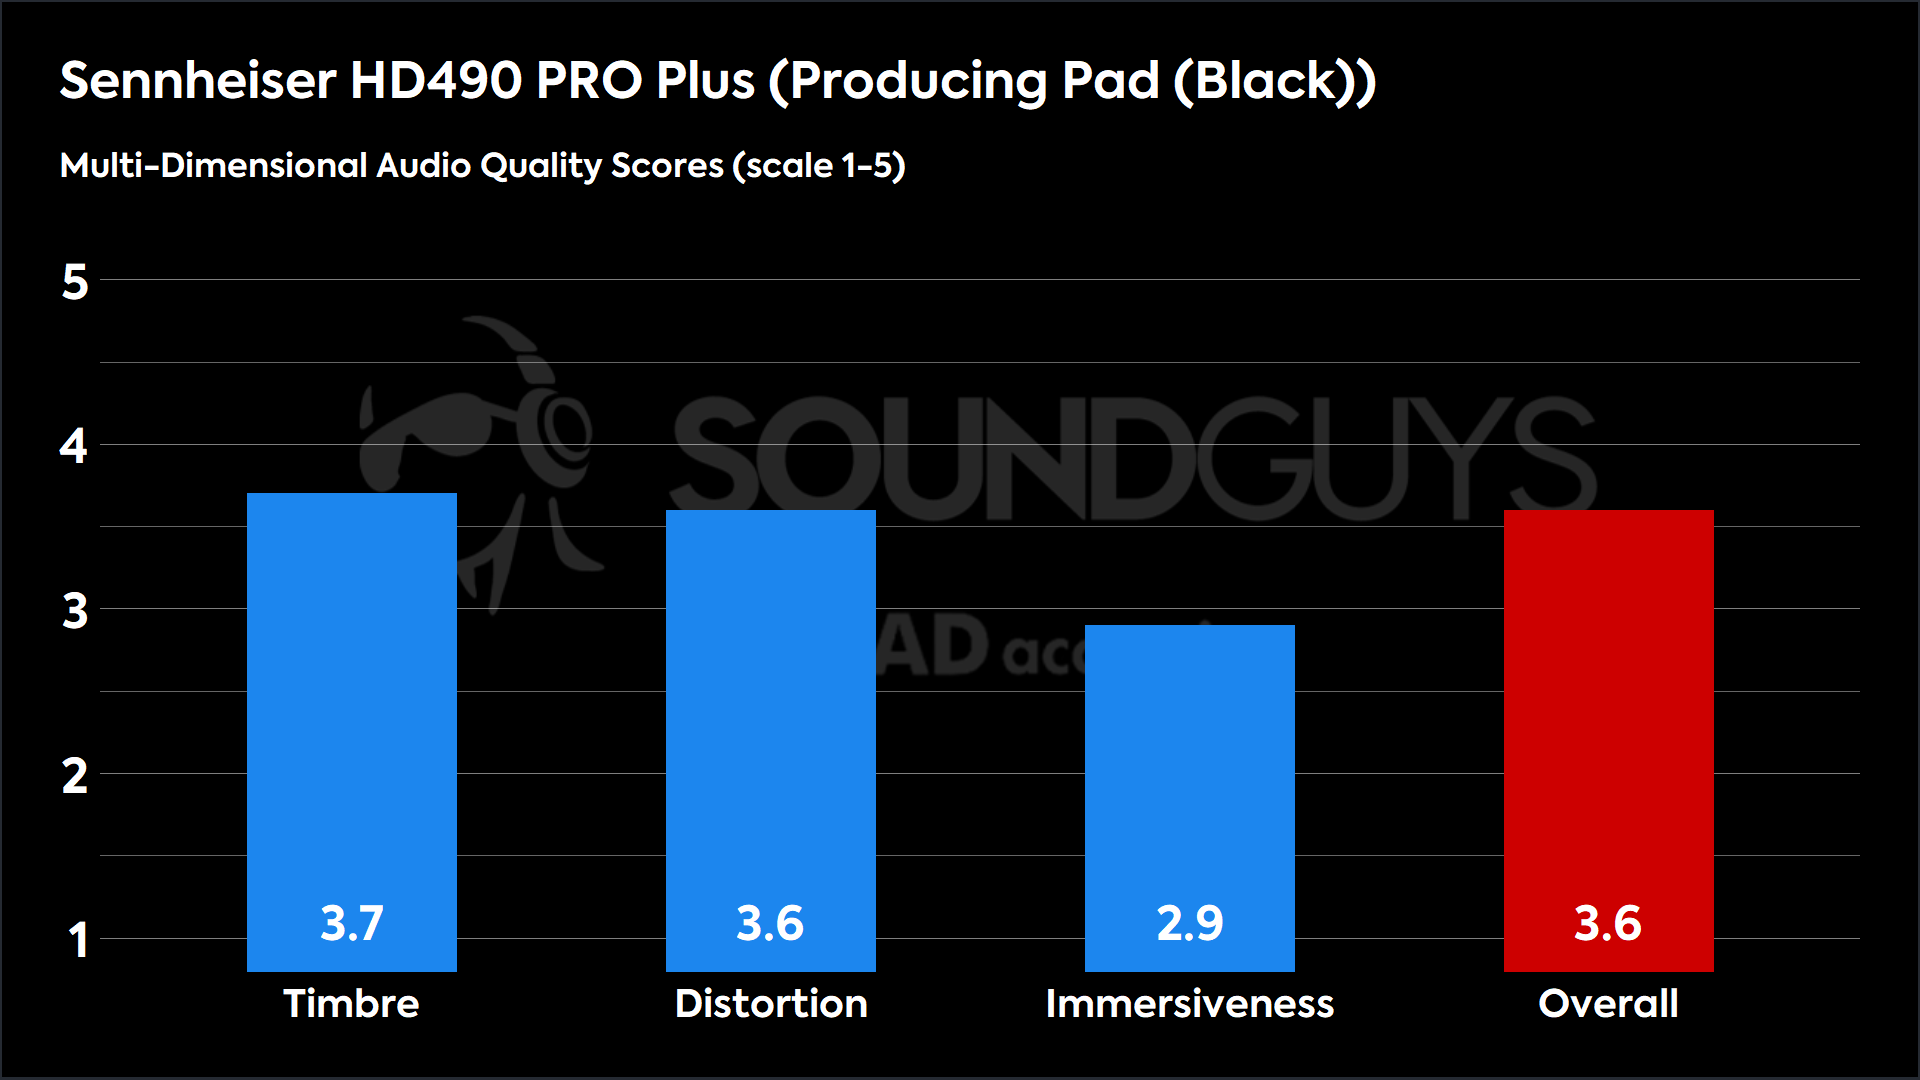 This chart shows the MDAQS results for the Sennheiser HD490 PRO Plus in Producing Pad (Black) mode. The Timbre score is 3.7, The Distortion score is 3.6, the Immersiveness score is 2.9, and the Overall Score is 3.6).